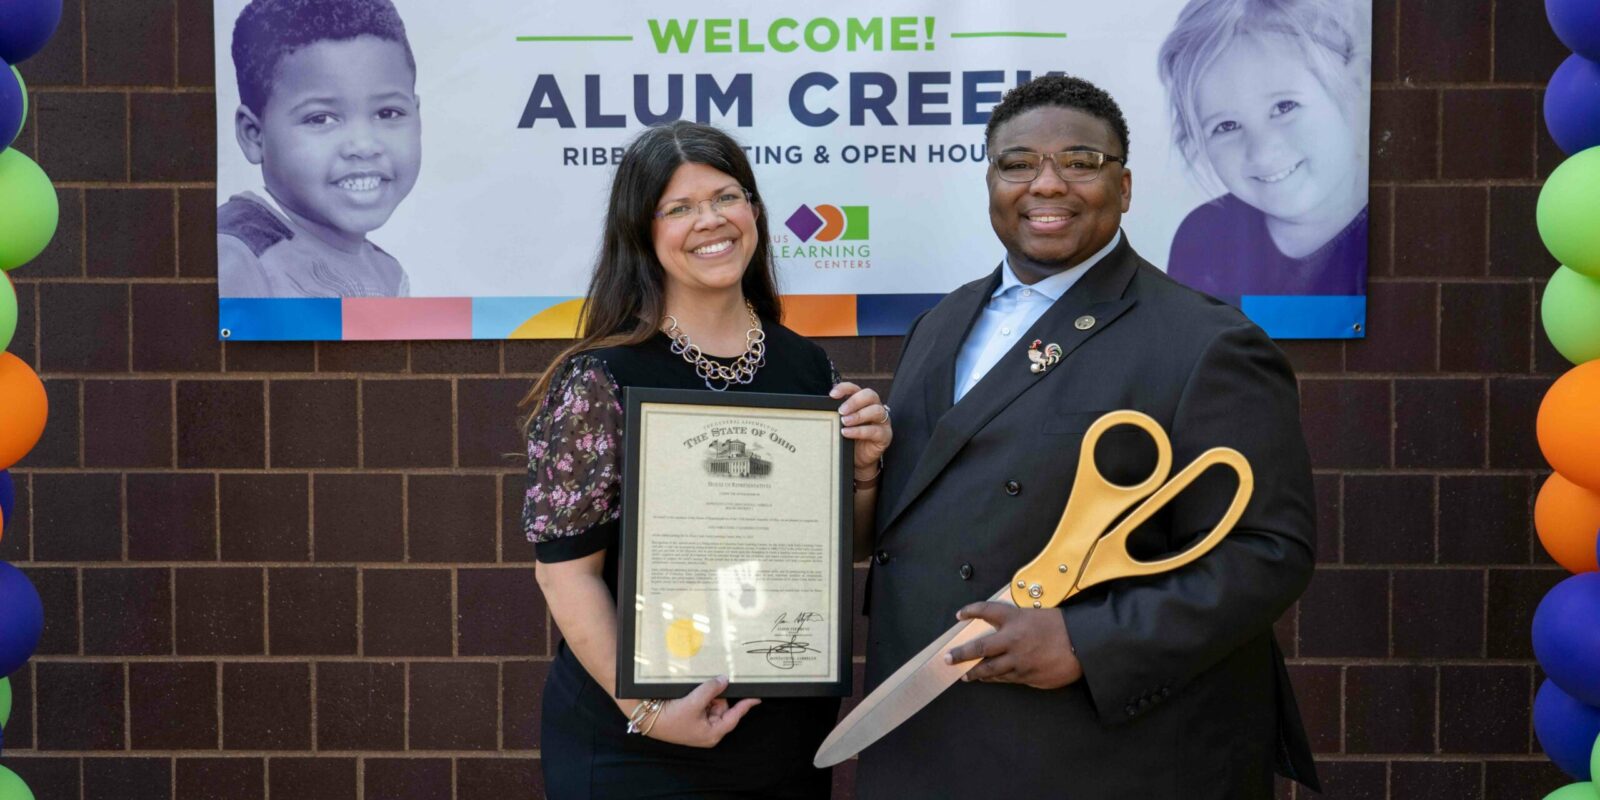 Gina Ginn holding an award at a ribbon cutting ceremony. Ohio Representative Dontavius Jarrells stands beside her with large scissors